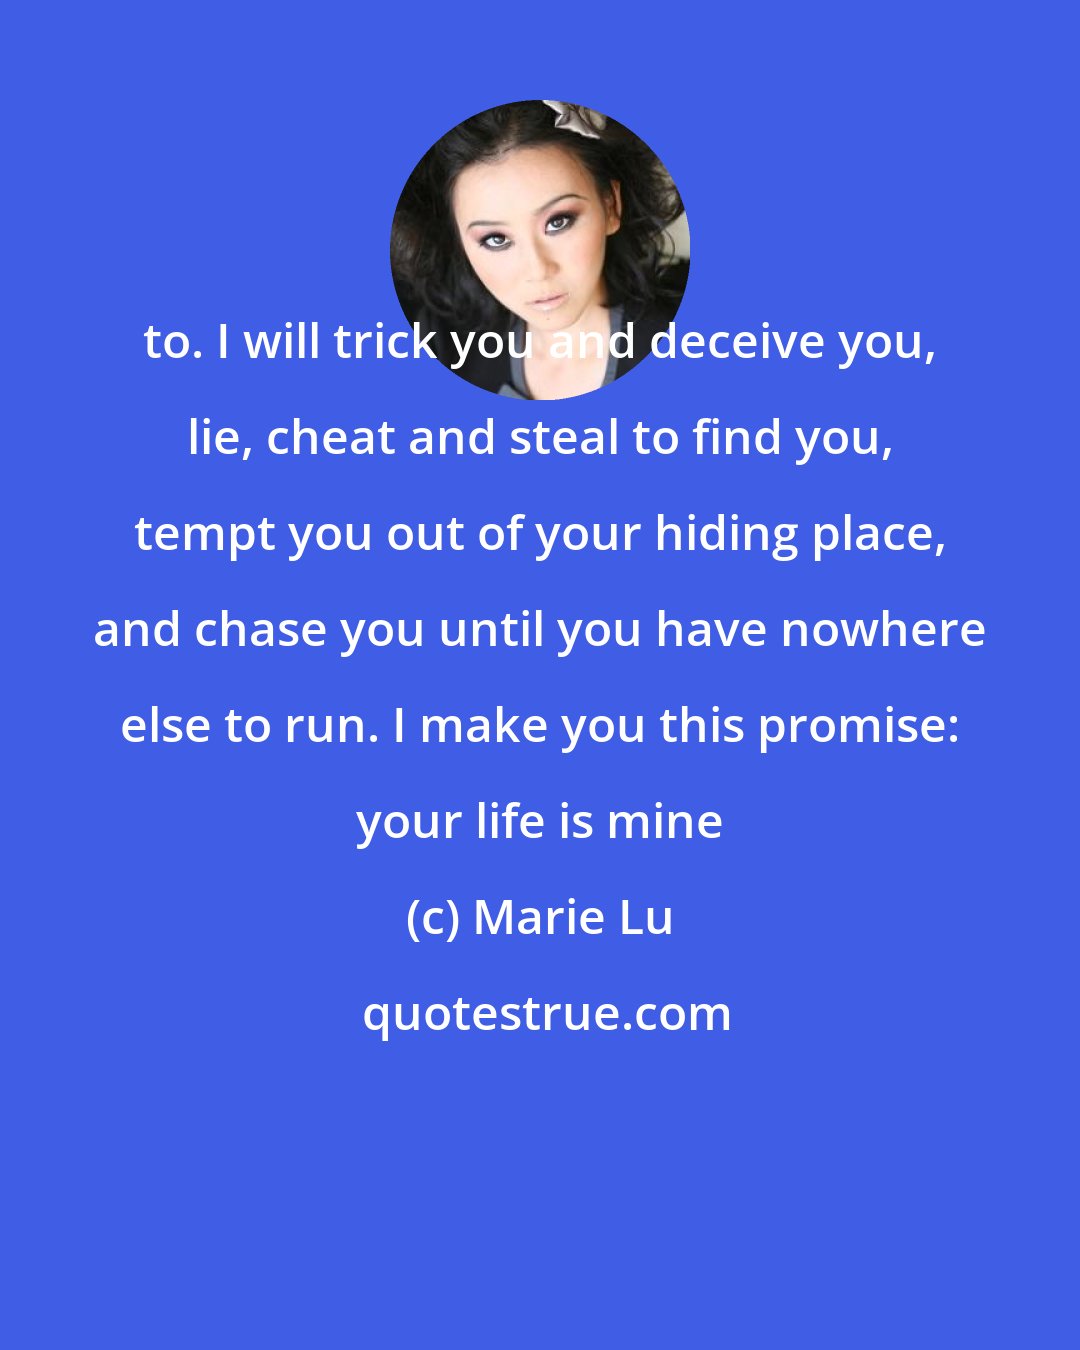 Marie Lu: to. I will trick you and deceive you, lie, cheat and steal to find you, tempt you out of your hiding place, and chase you until you have nowhere else to run. I make you this promise: your life is mine